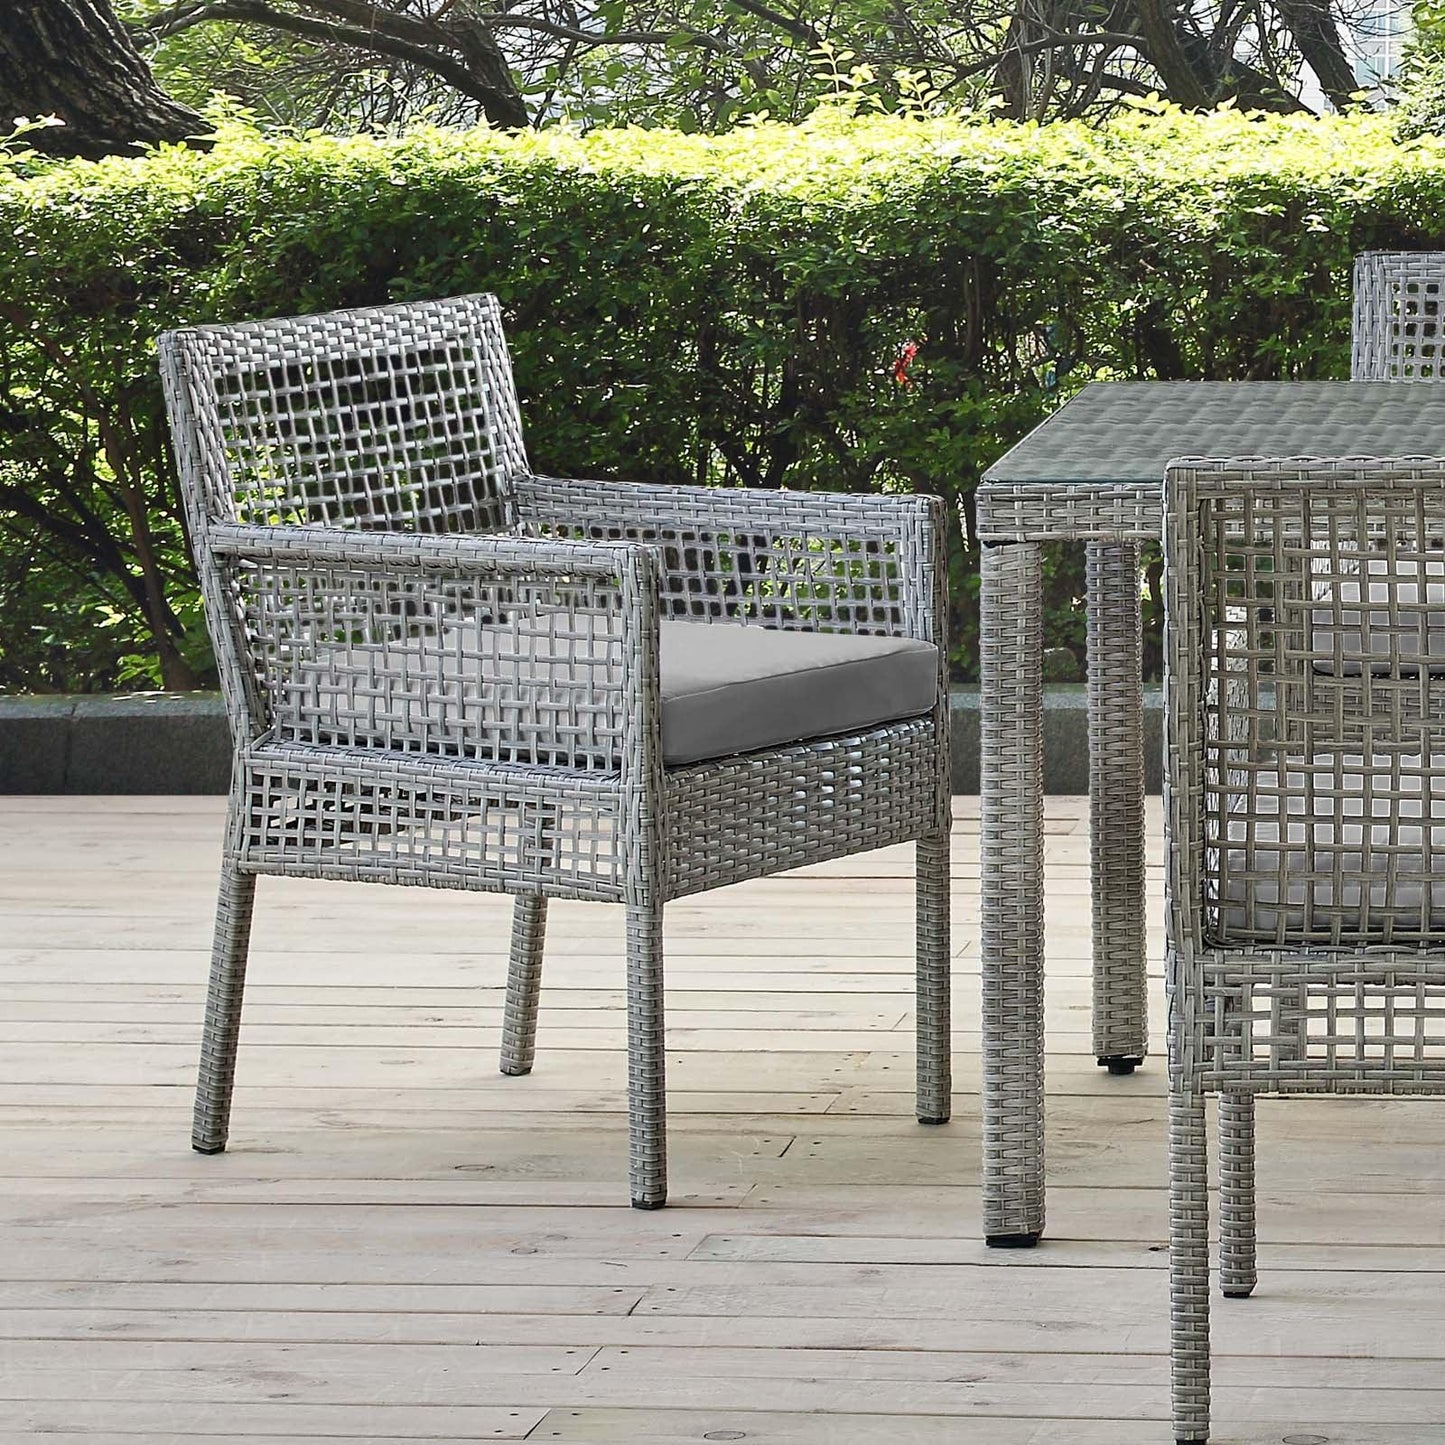 Modway Aura Outdoor Patio Wicker Rattan Dining Armchair FredCo